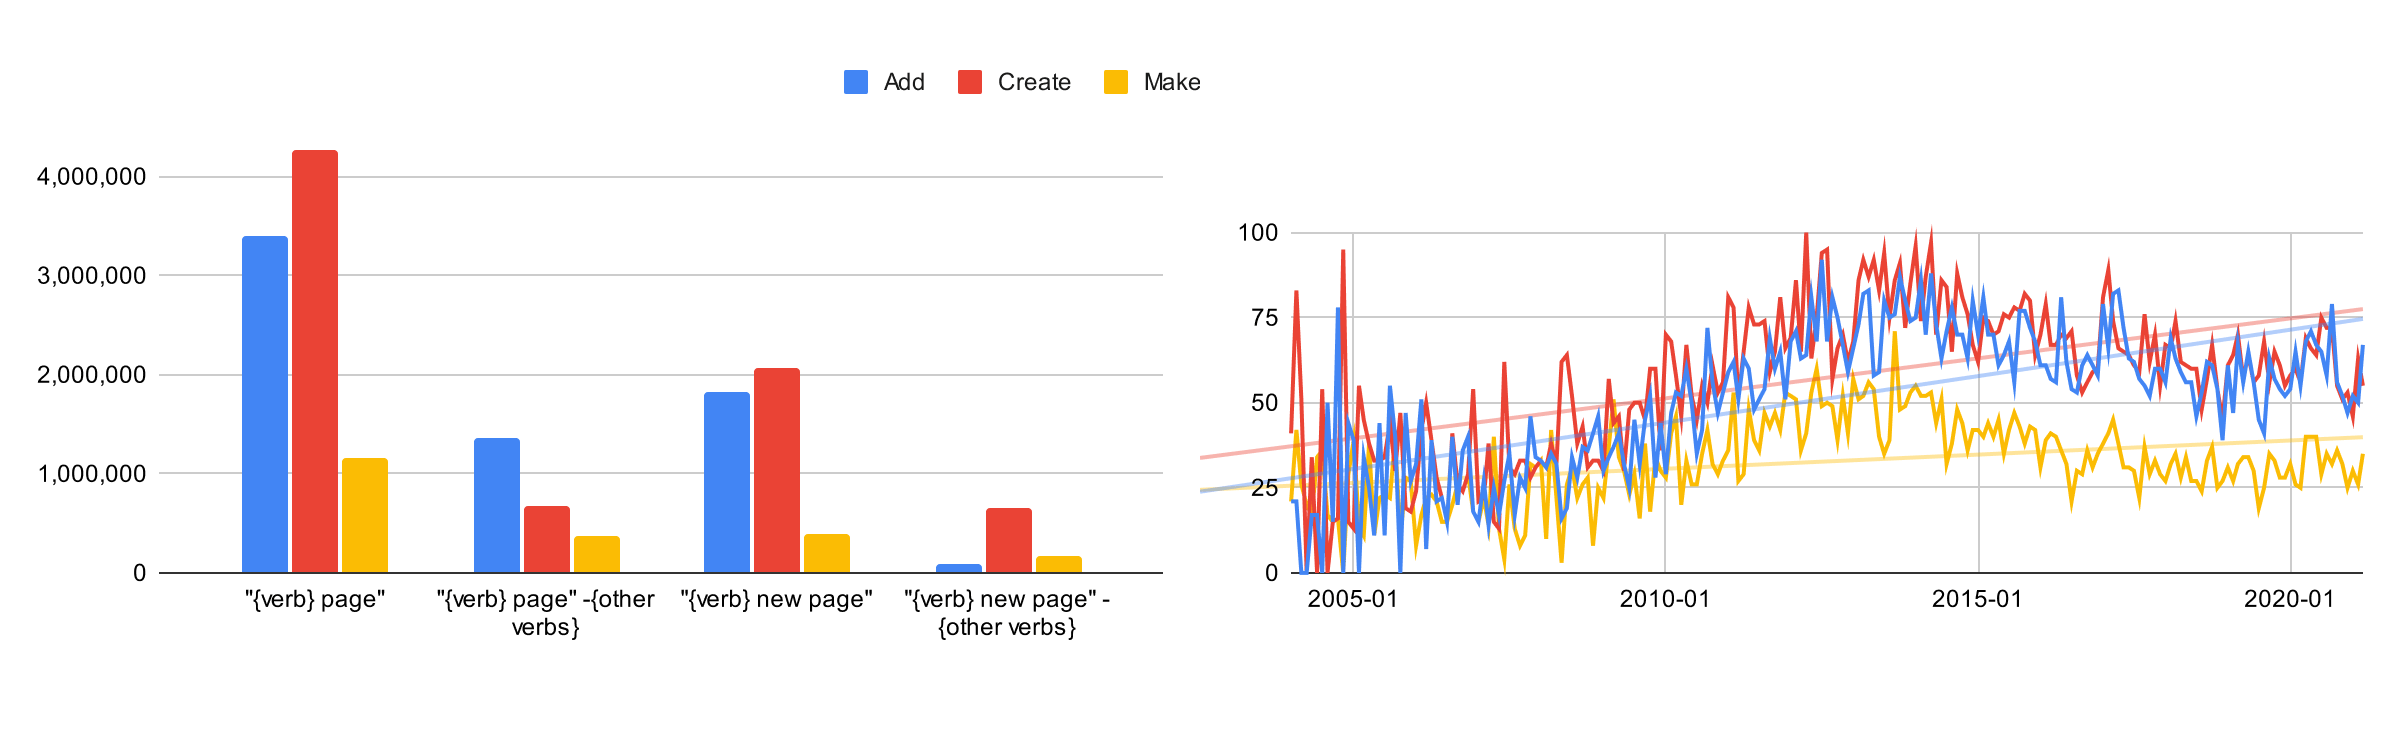 Chart showing the search results and trends for the Create operation.